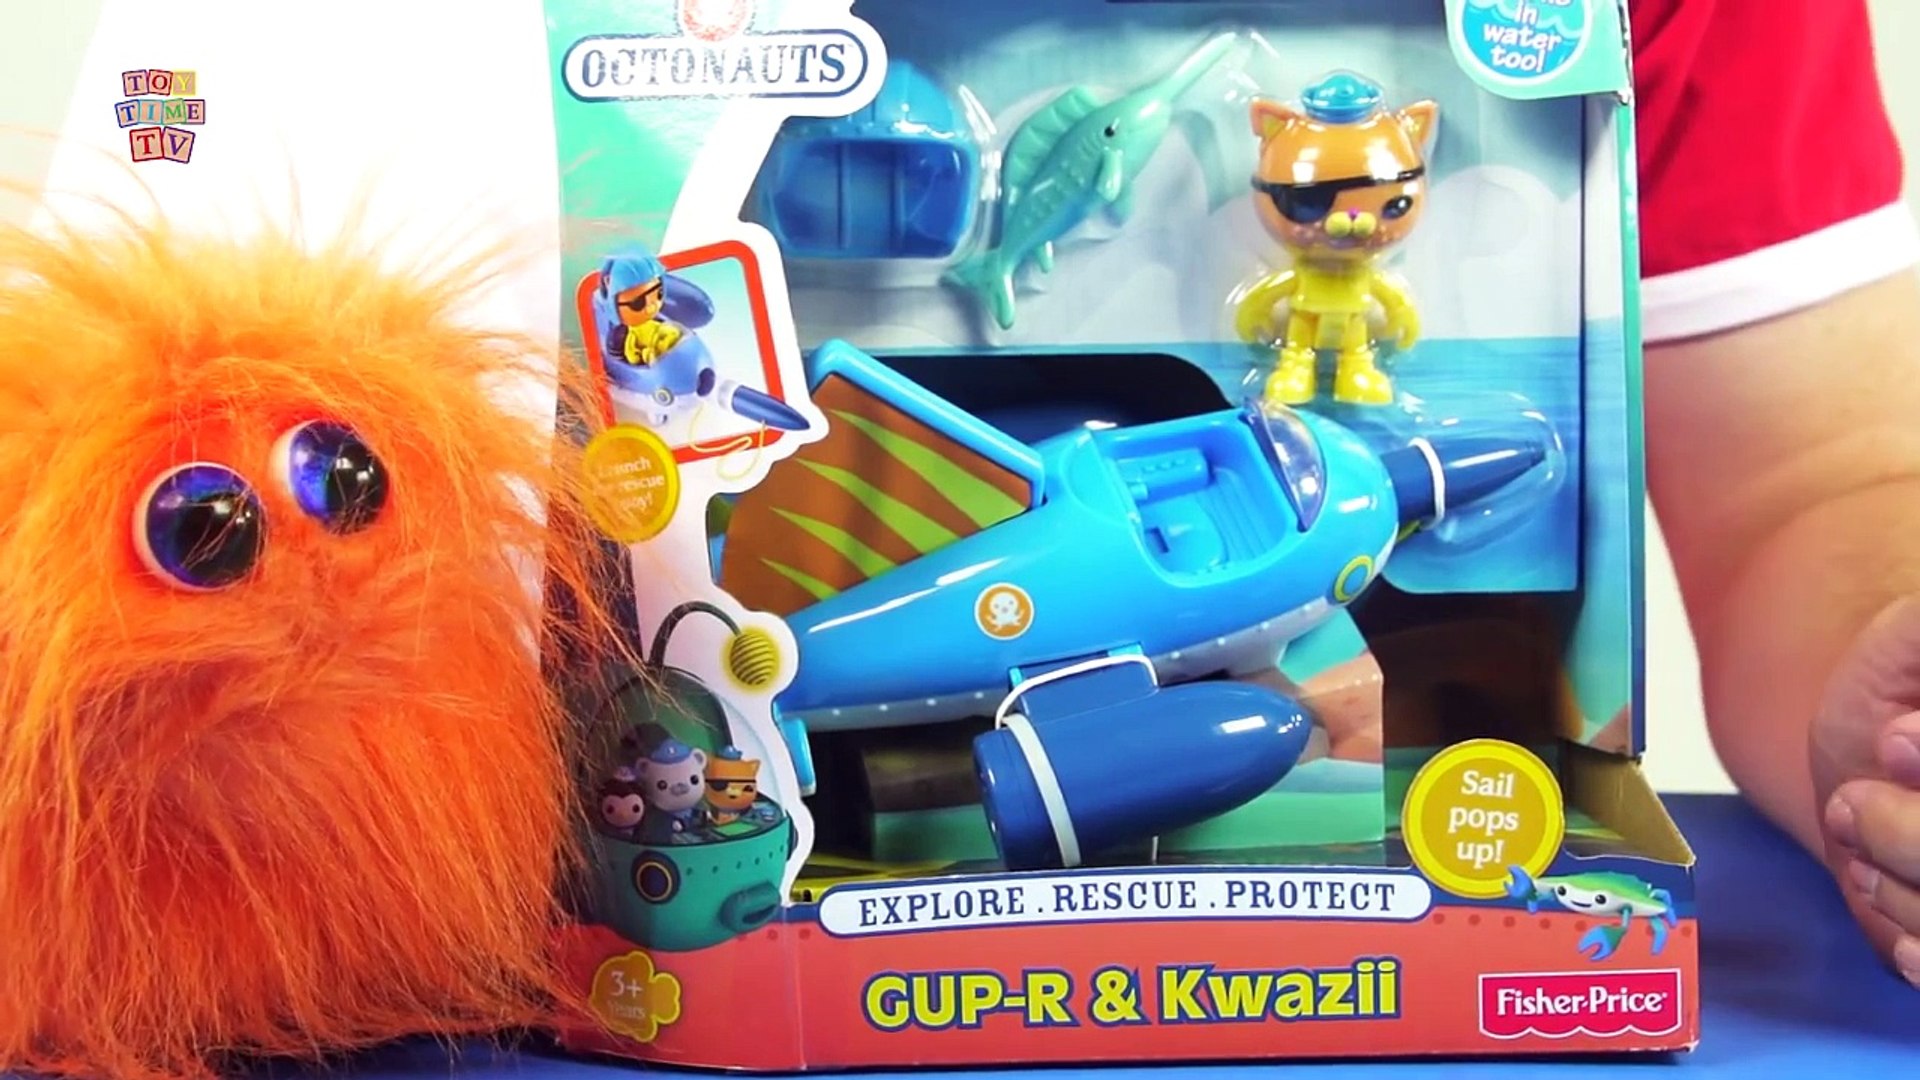 Inkling & The Seahorse Creature Pack & 3 Glow in the dark Articulated Figures GUP Speeder Q Includes GUP M & Kwazi Playset Fisher Price The Octonauts 6 Piece Gift Set